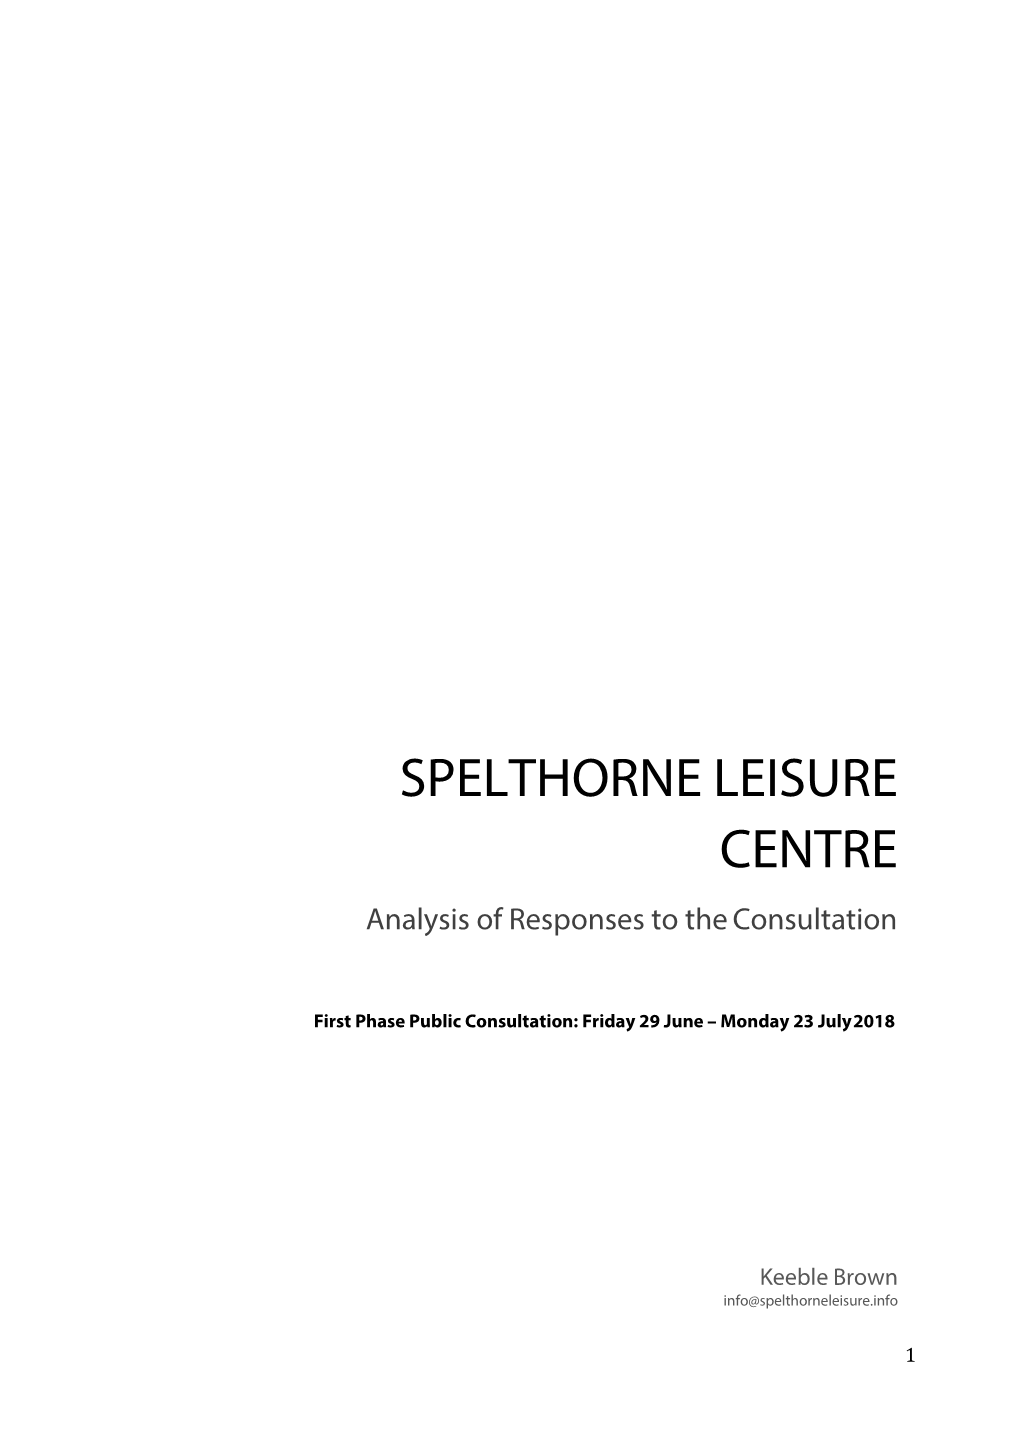 SPELTHORNE LEISURE CENTRE Analysis of Responses to the Consultation